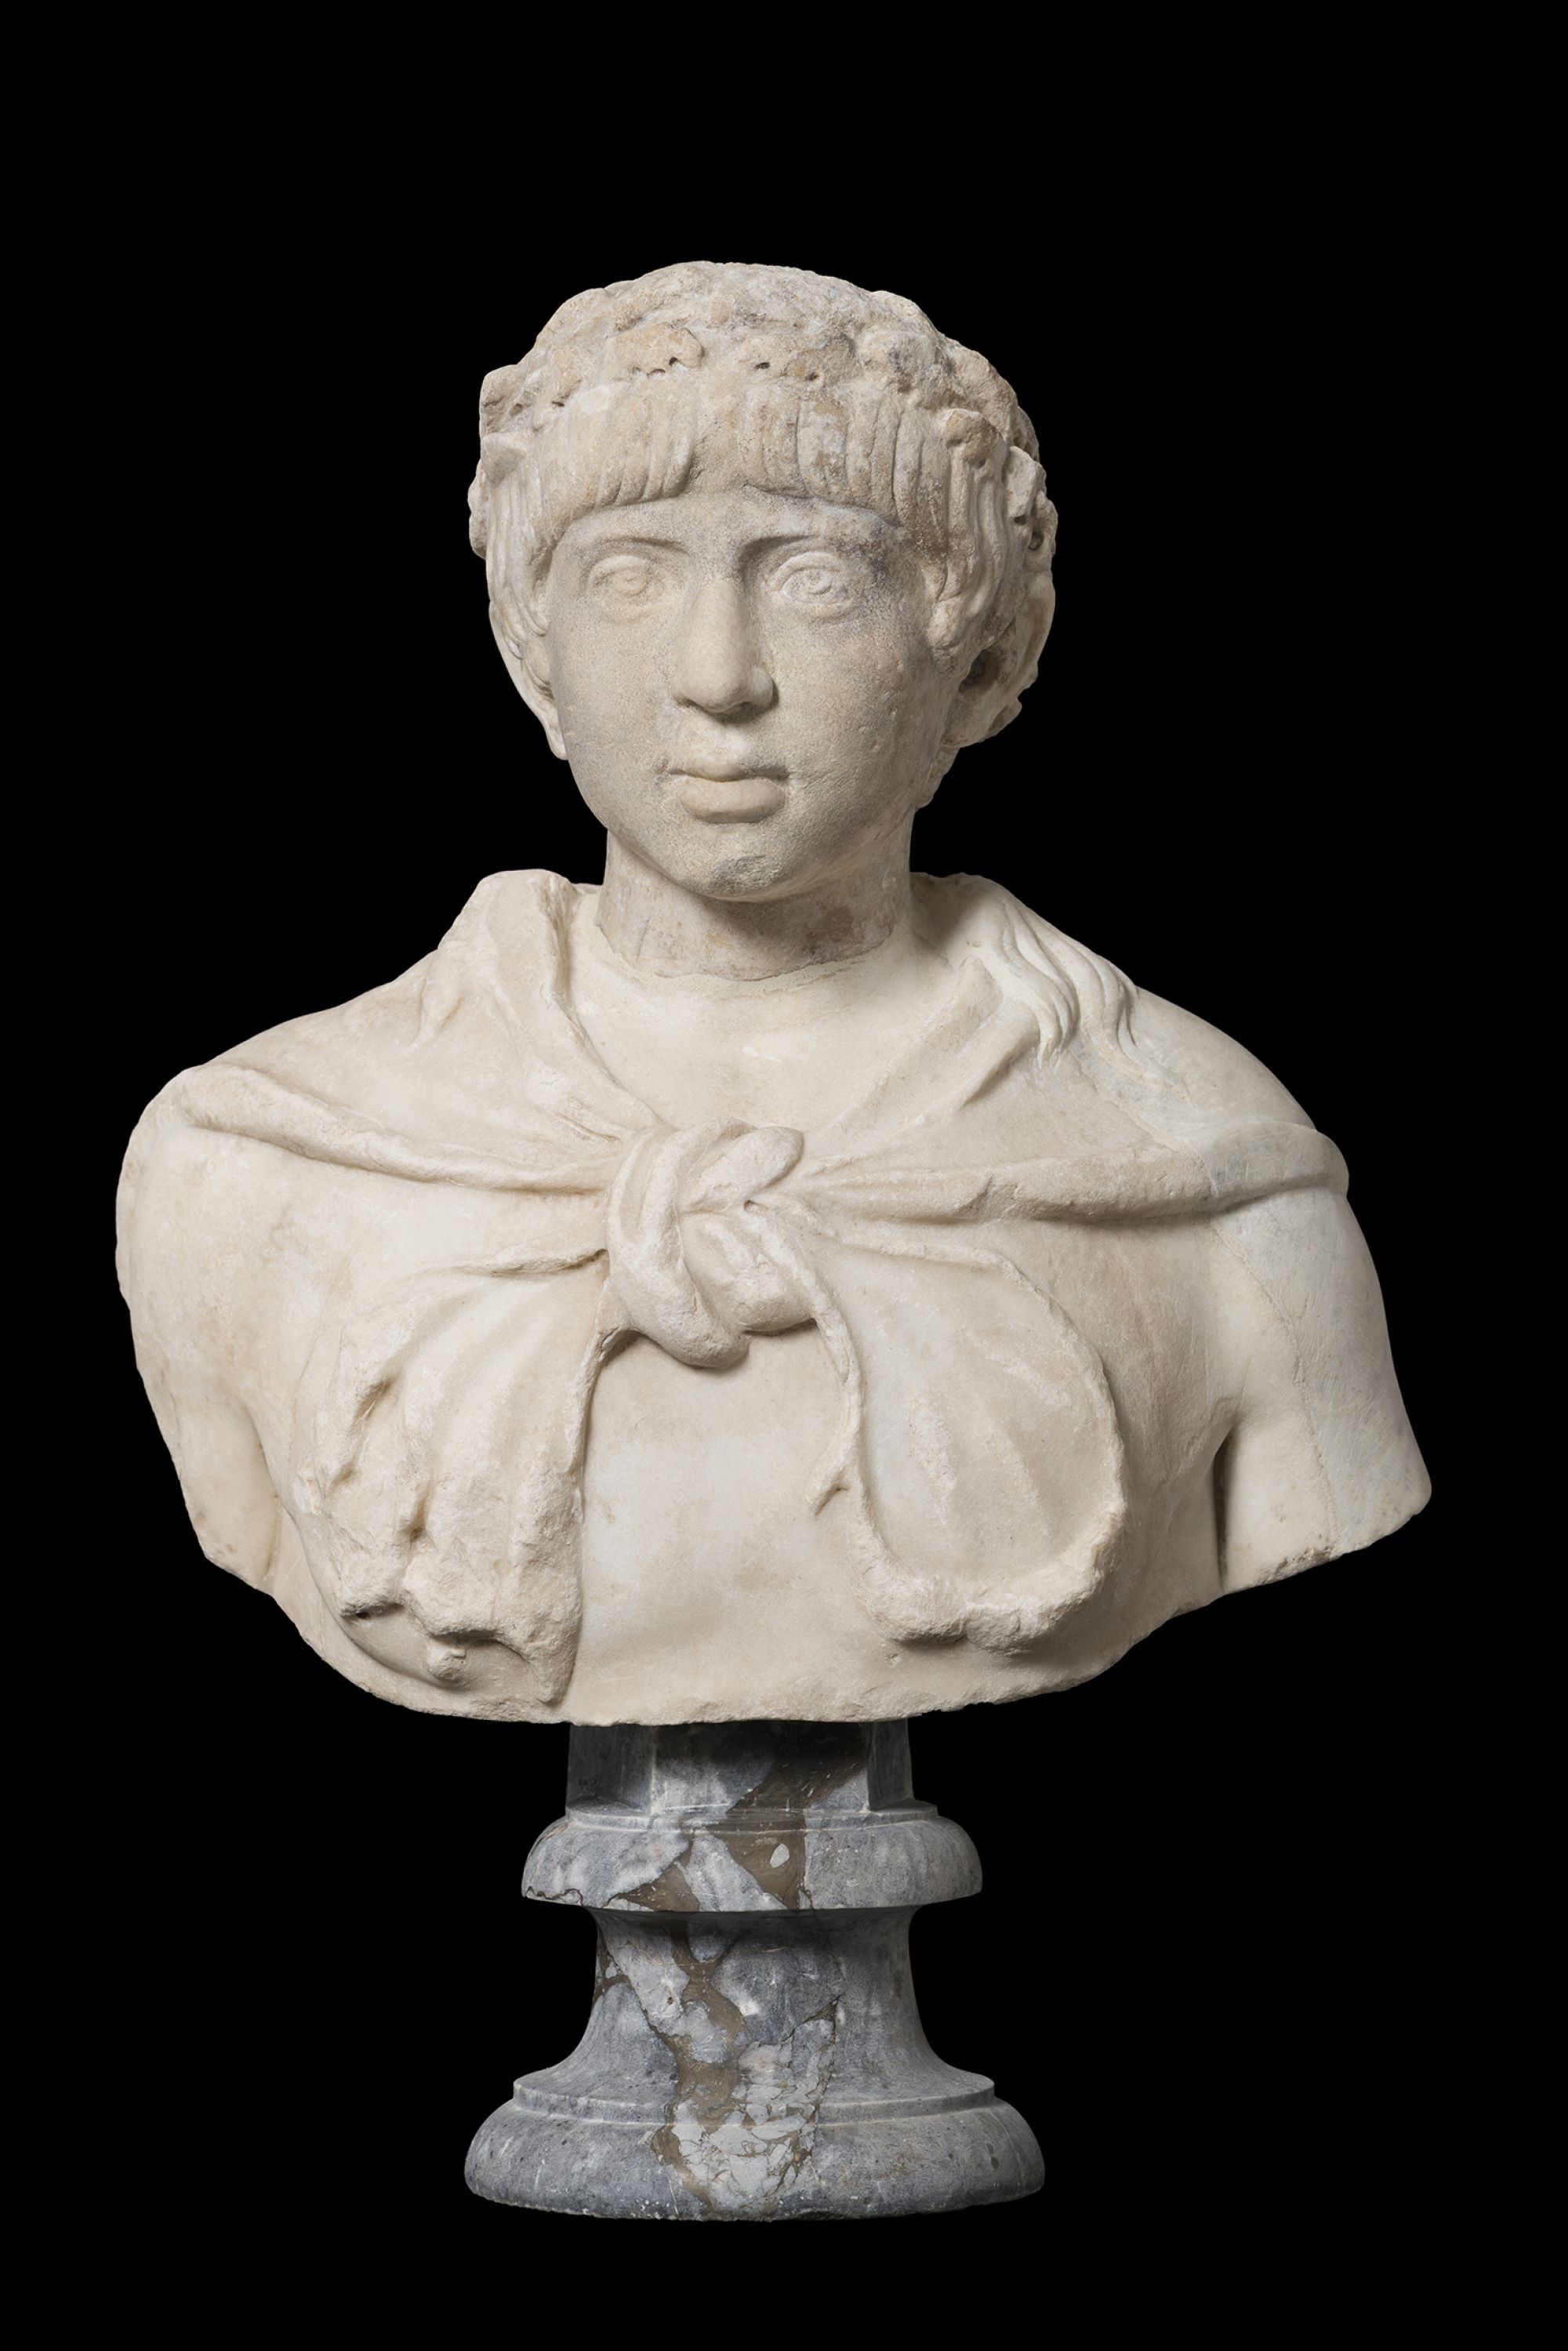 Portrait Head of a Young Prince, Called Romulus Augustulus, on an